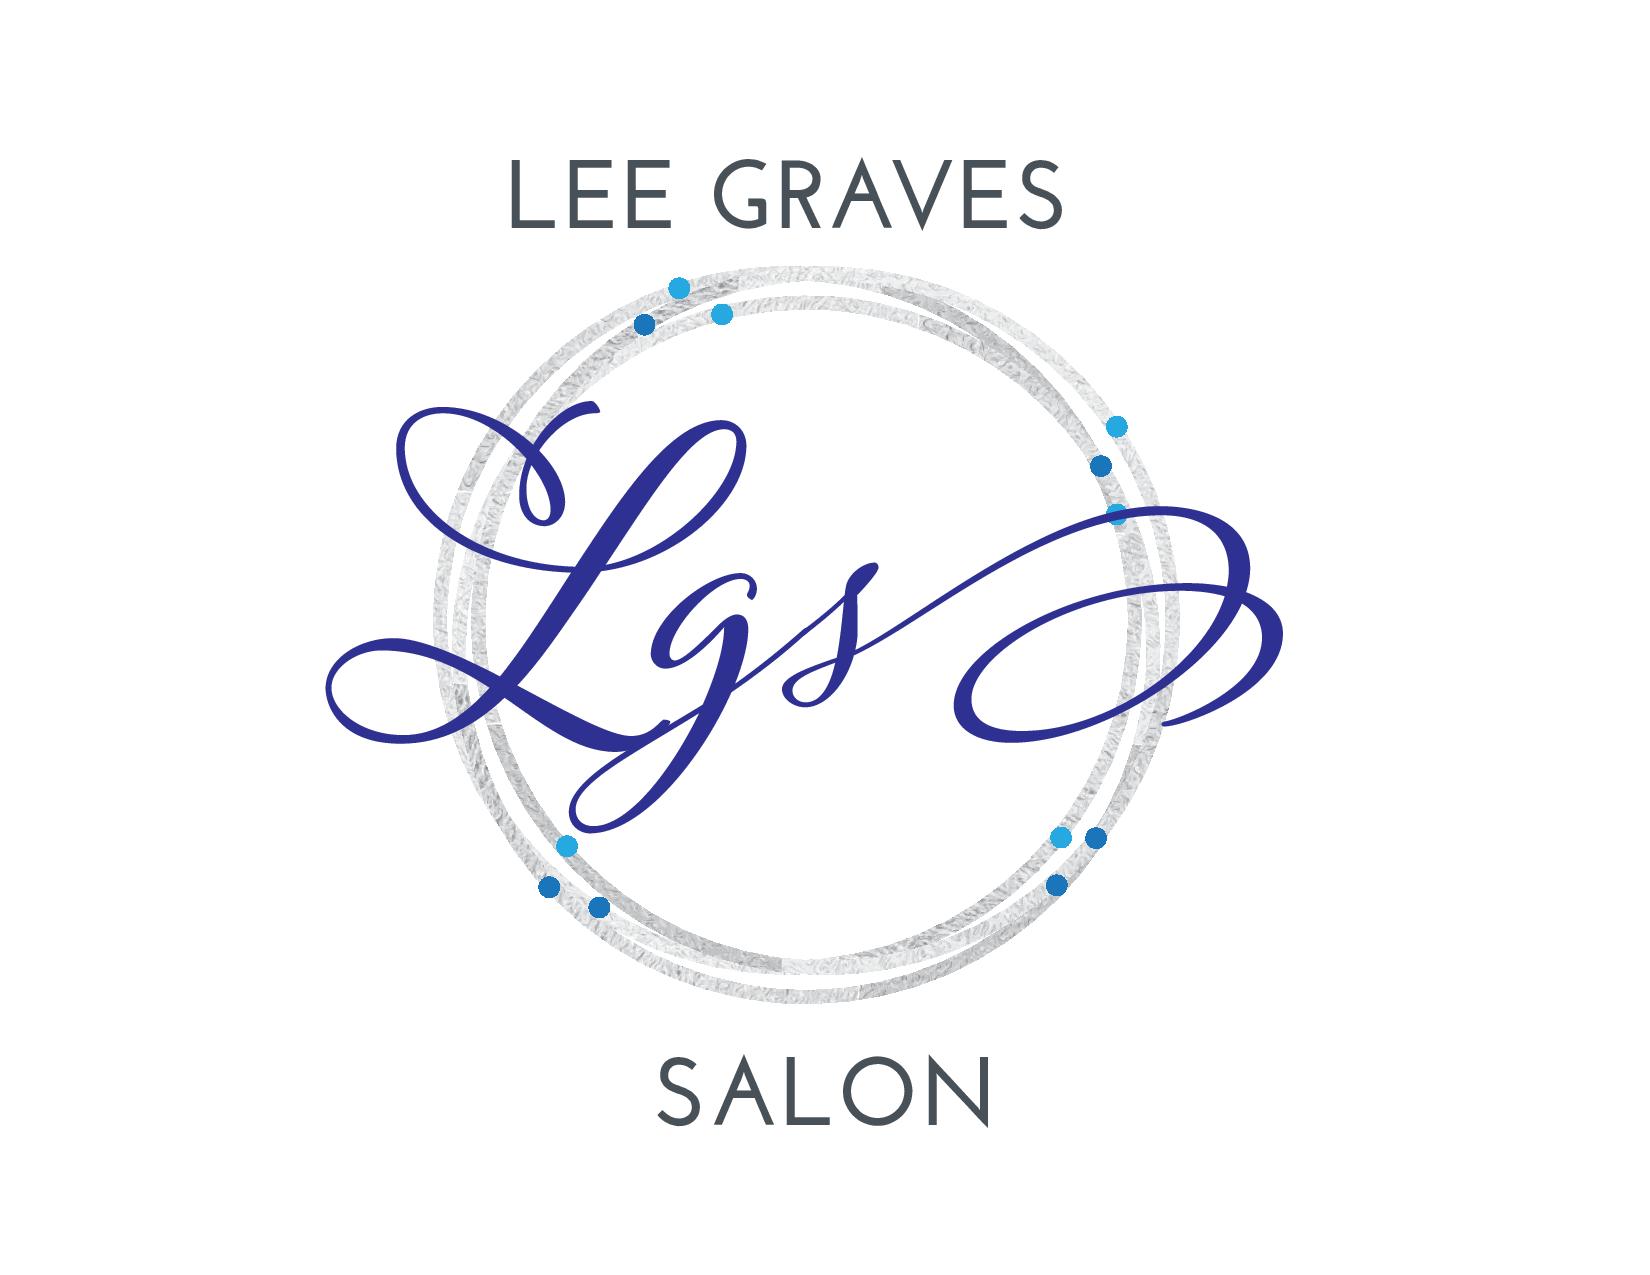 Reviews for Lee Graves Salon, plano, TX